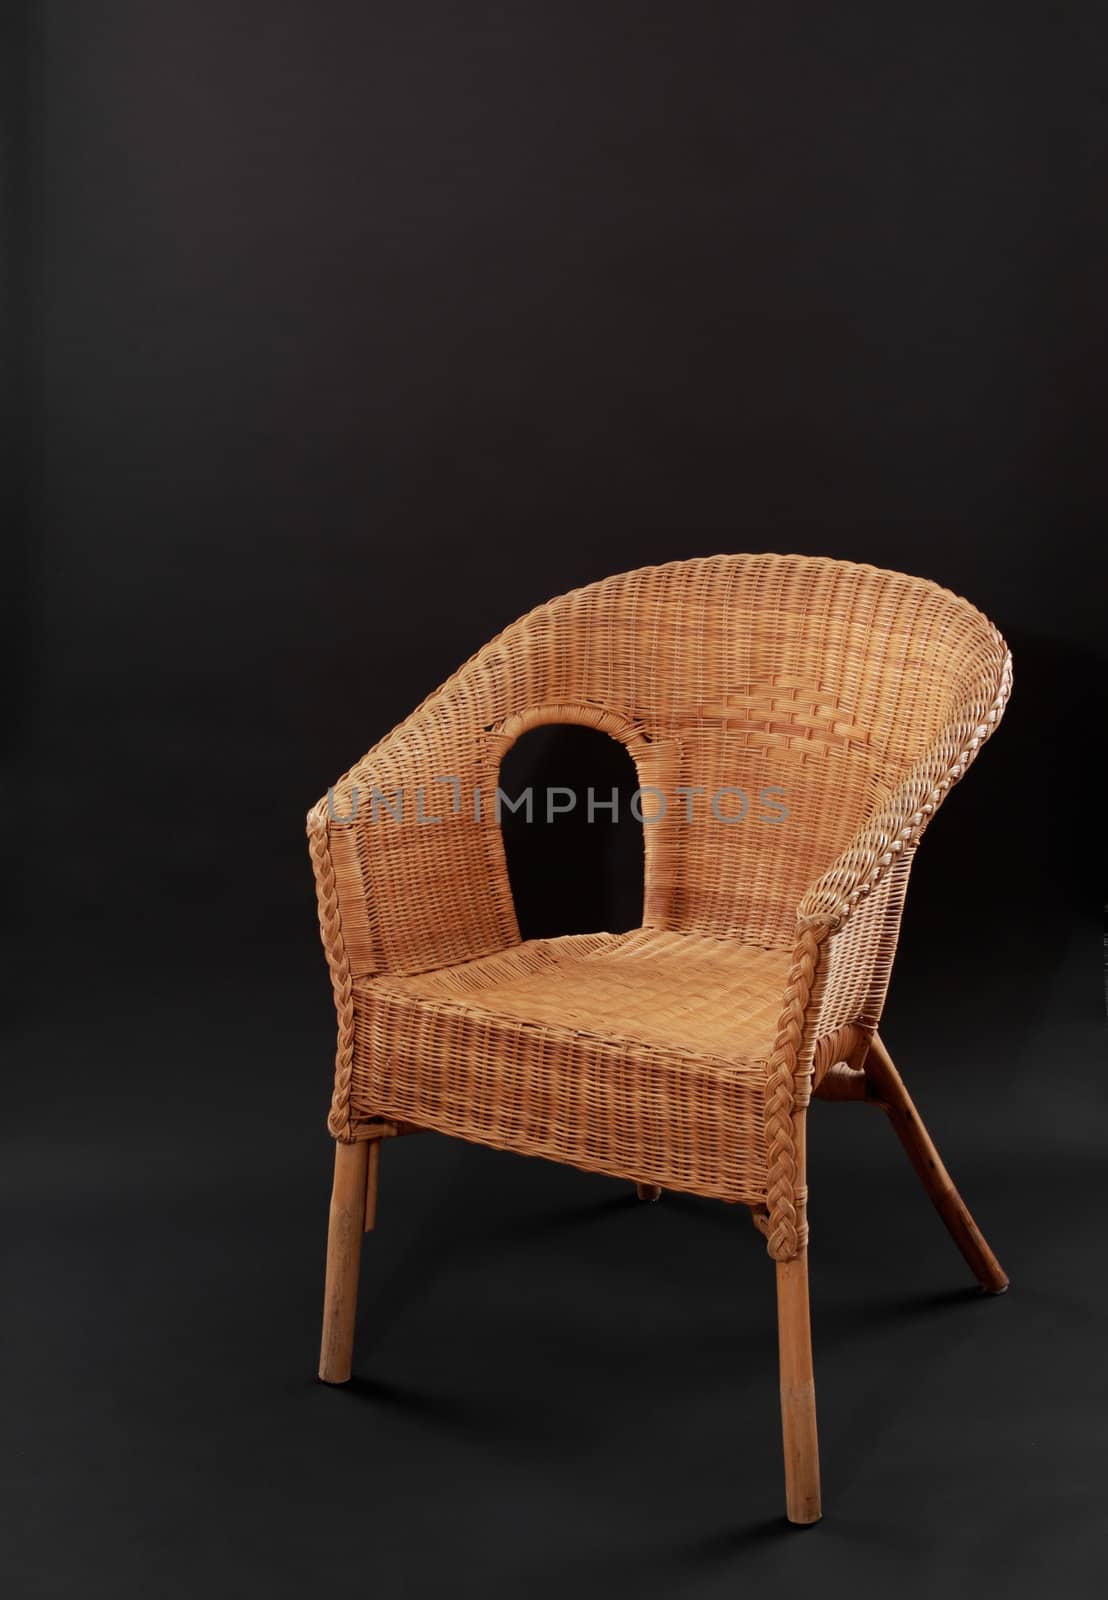 wicker chair over black background